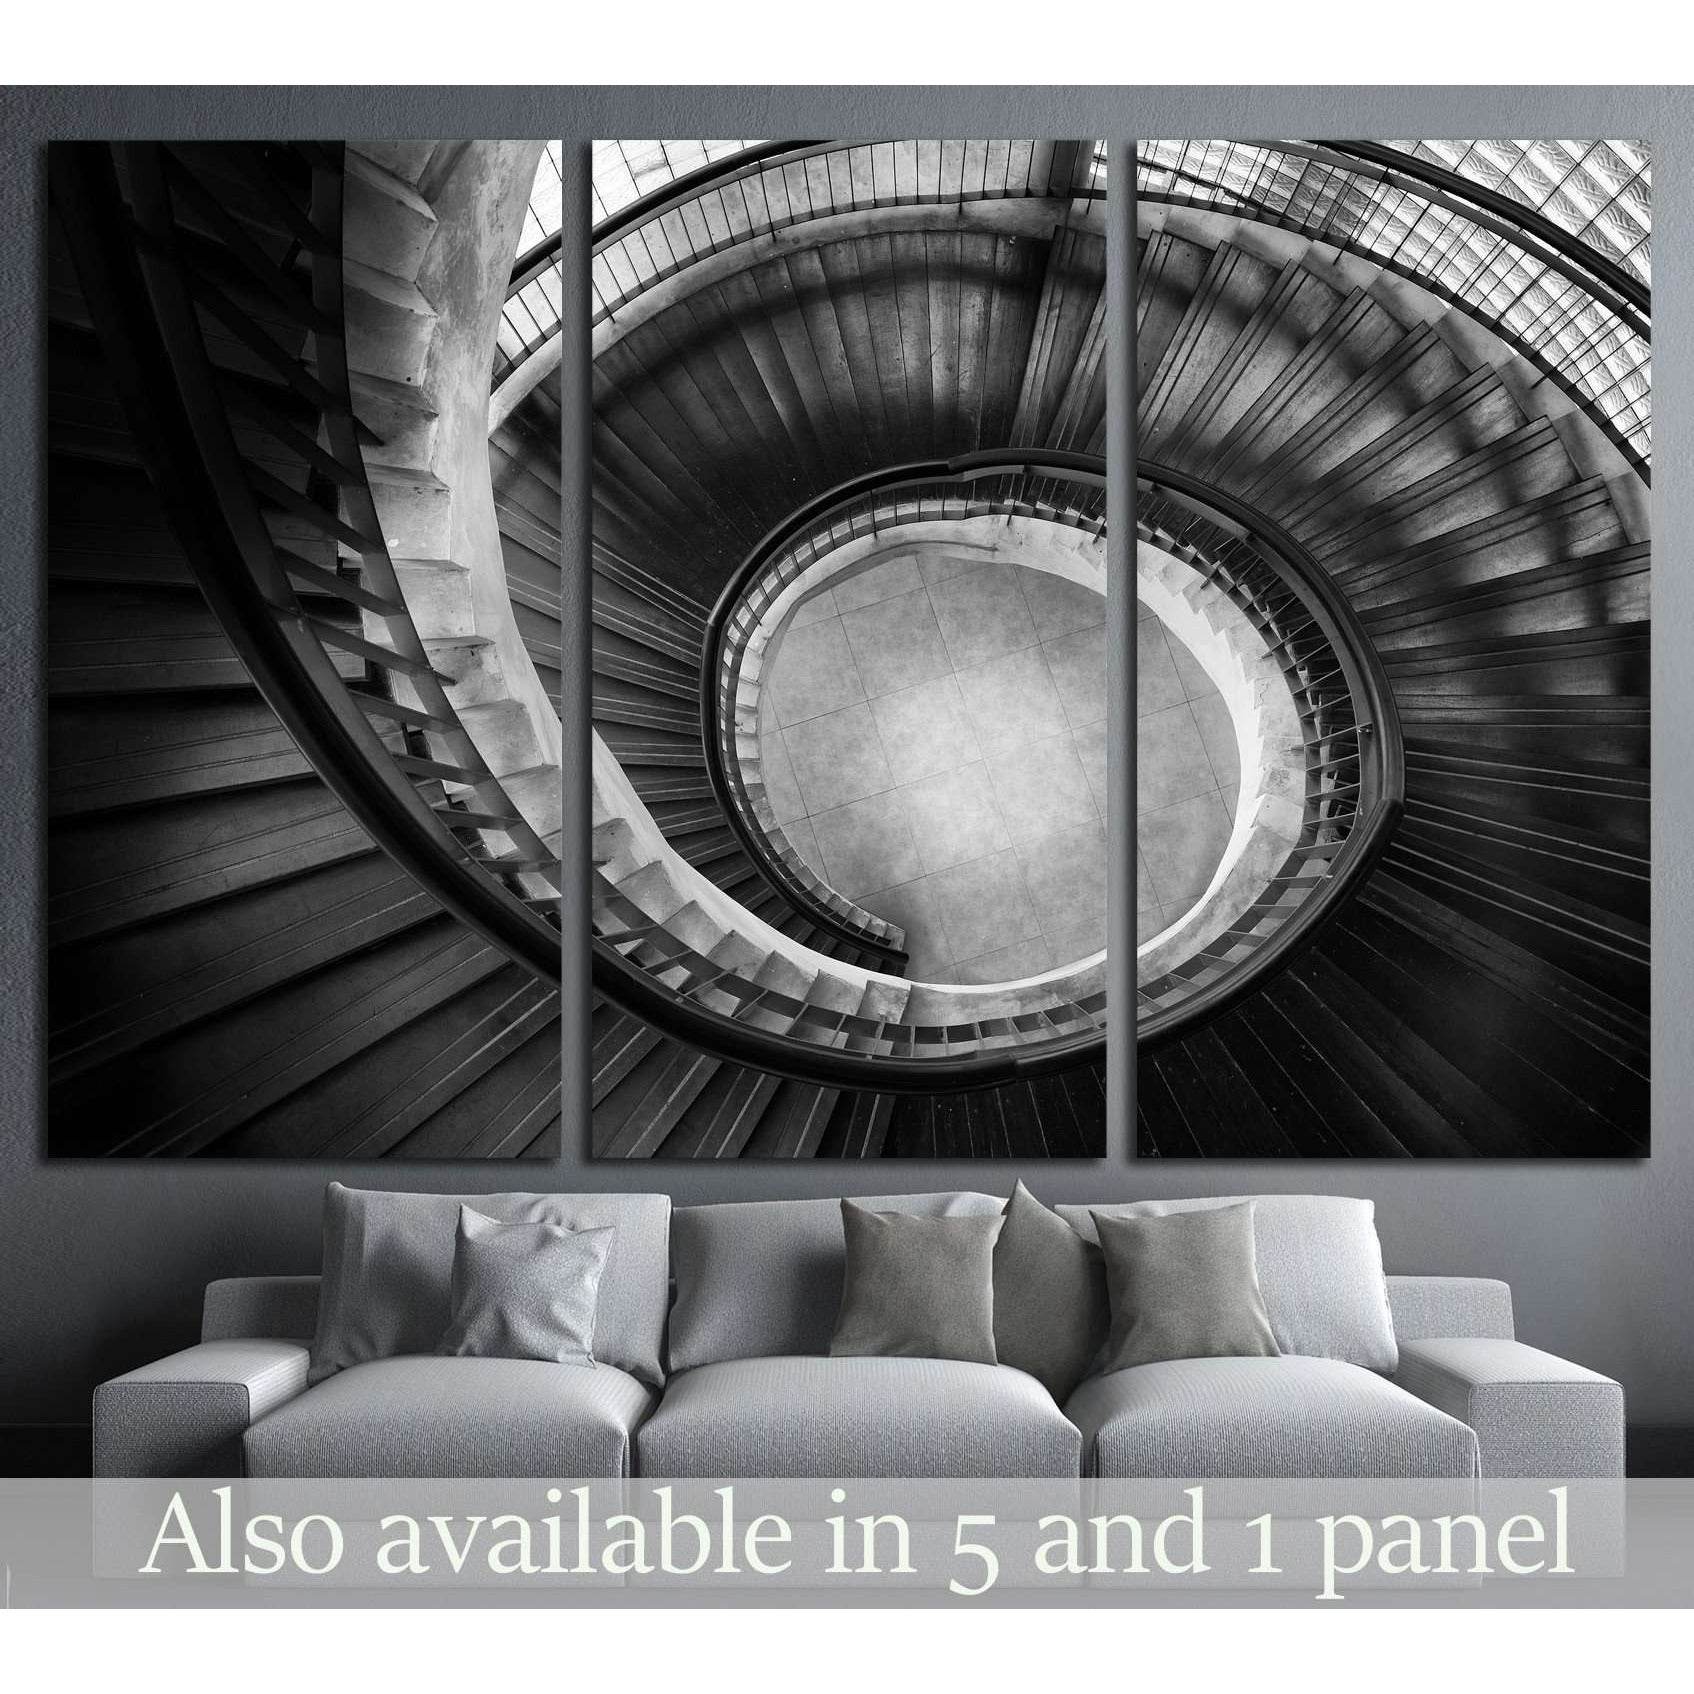 Stair with the spiral twist shape №1604 Ready to Hang Canvas Print